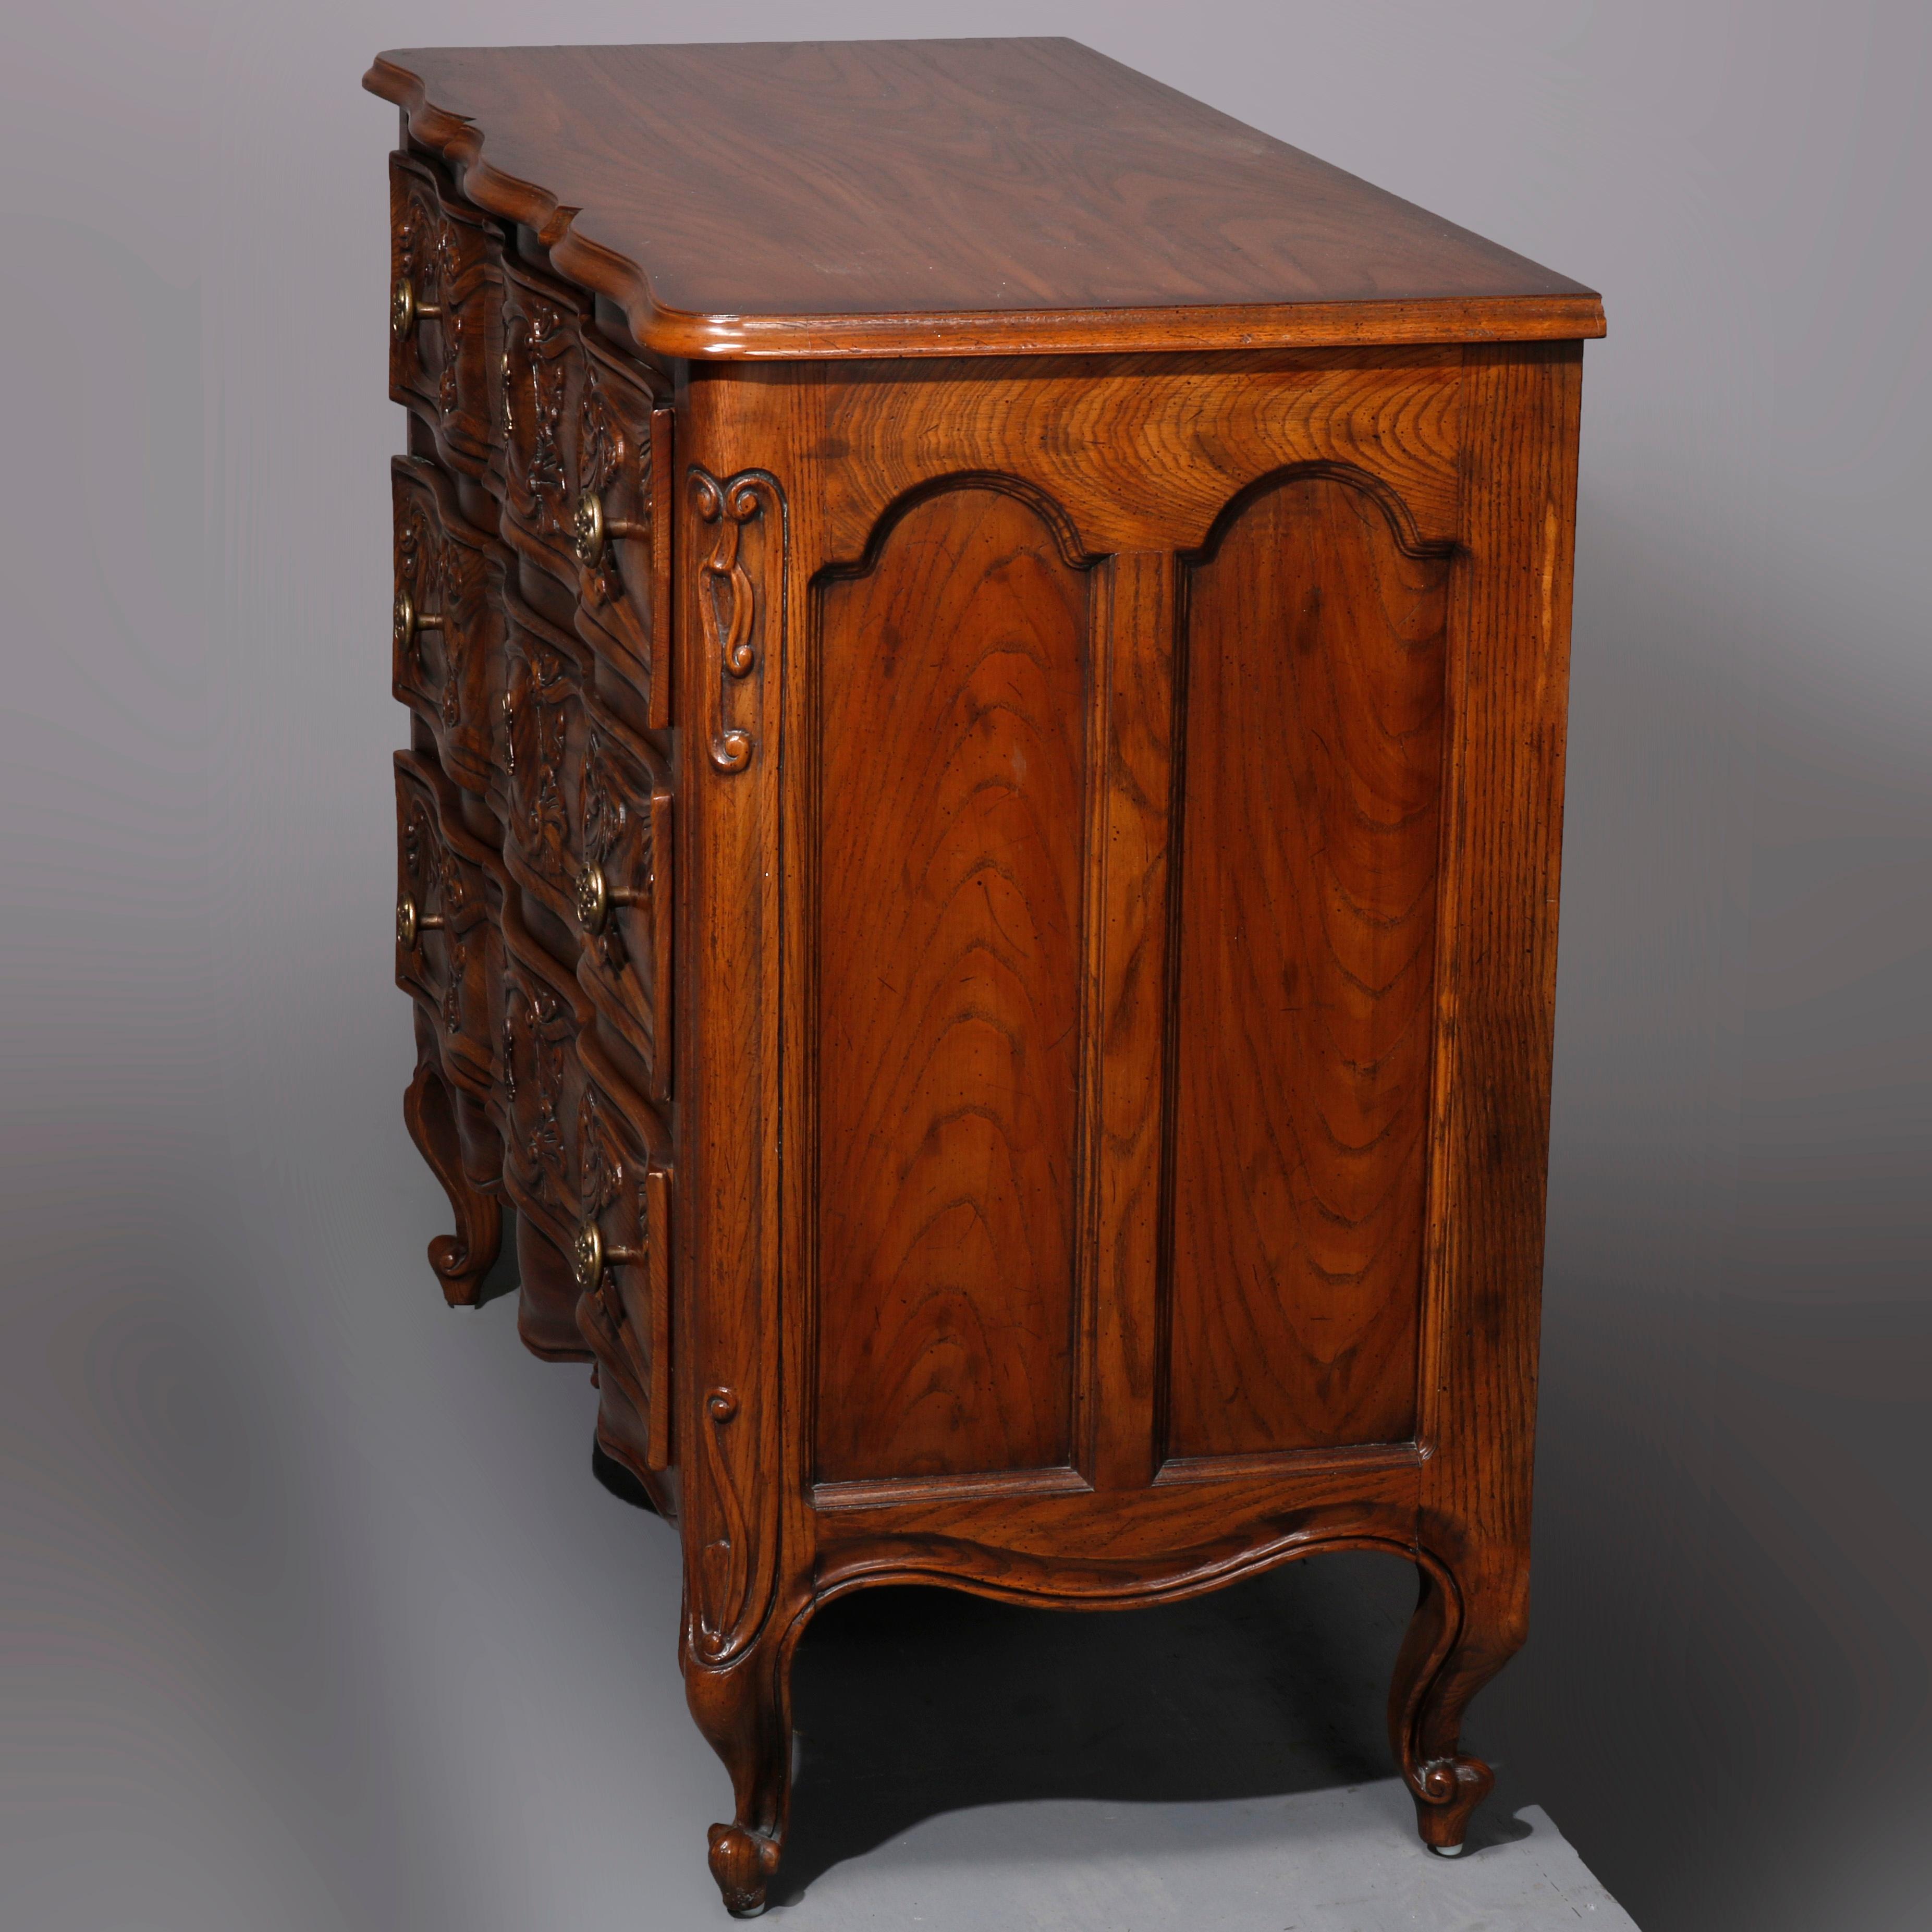 An antique French Louis IV style chest of drawers by Henredon offers oak construction with shaped top surmounting swell front chest with three shaped drawers having carved foliate elements, paneled sides, raised on cabriole legs terminating in